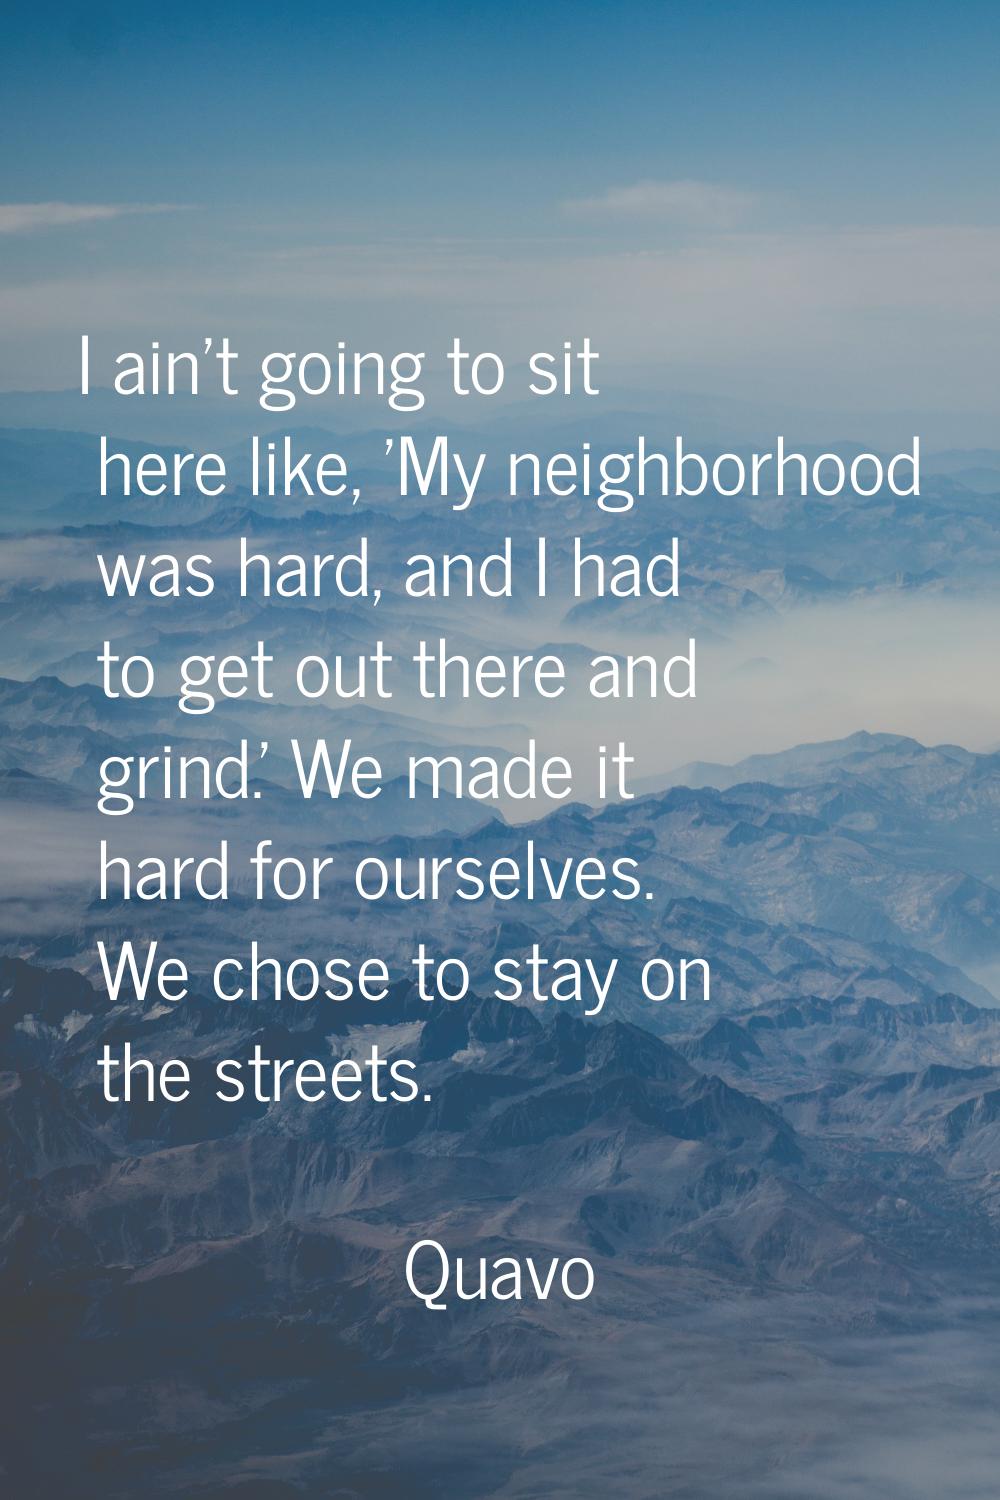 I ain't going to sit here like, 'My neighborhood was hard, and I had to get out there and grind.' W